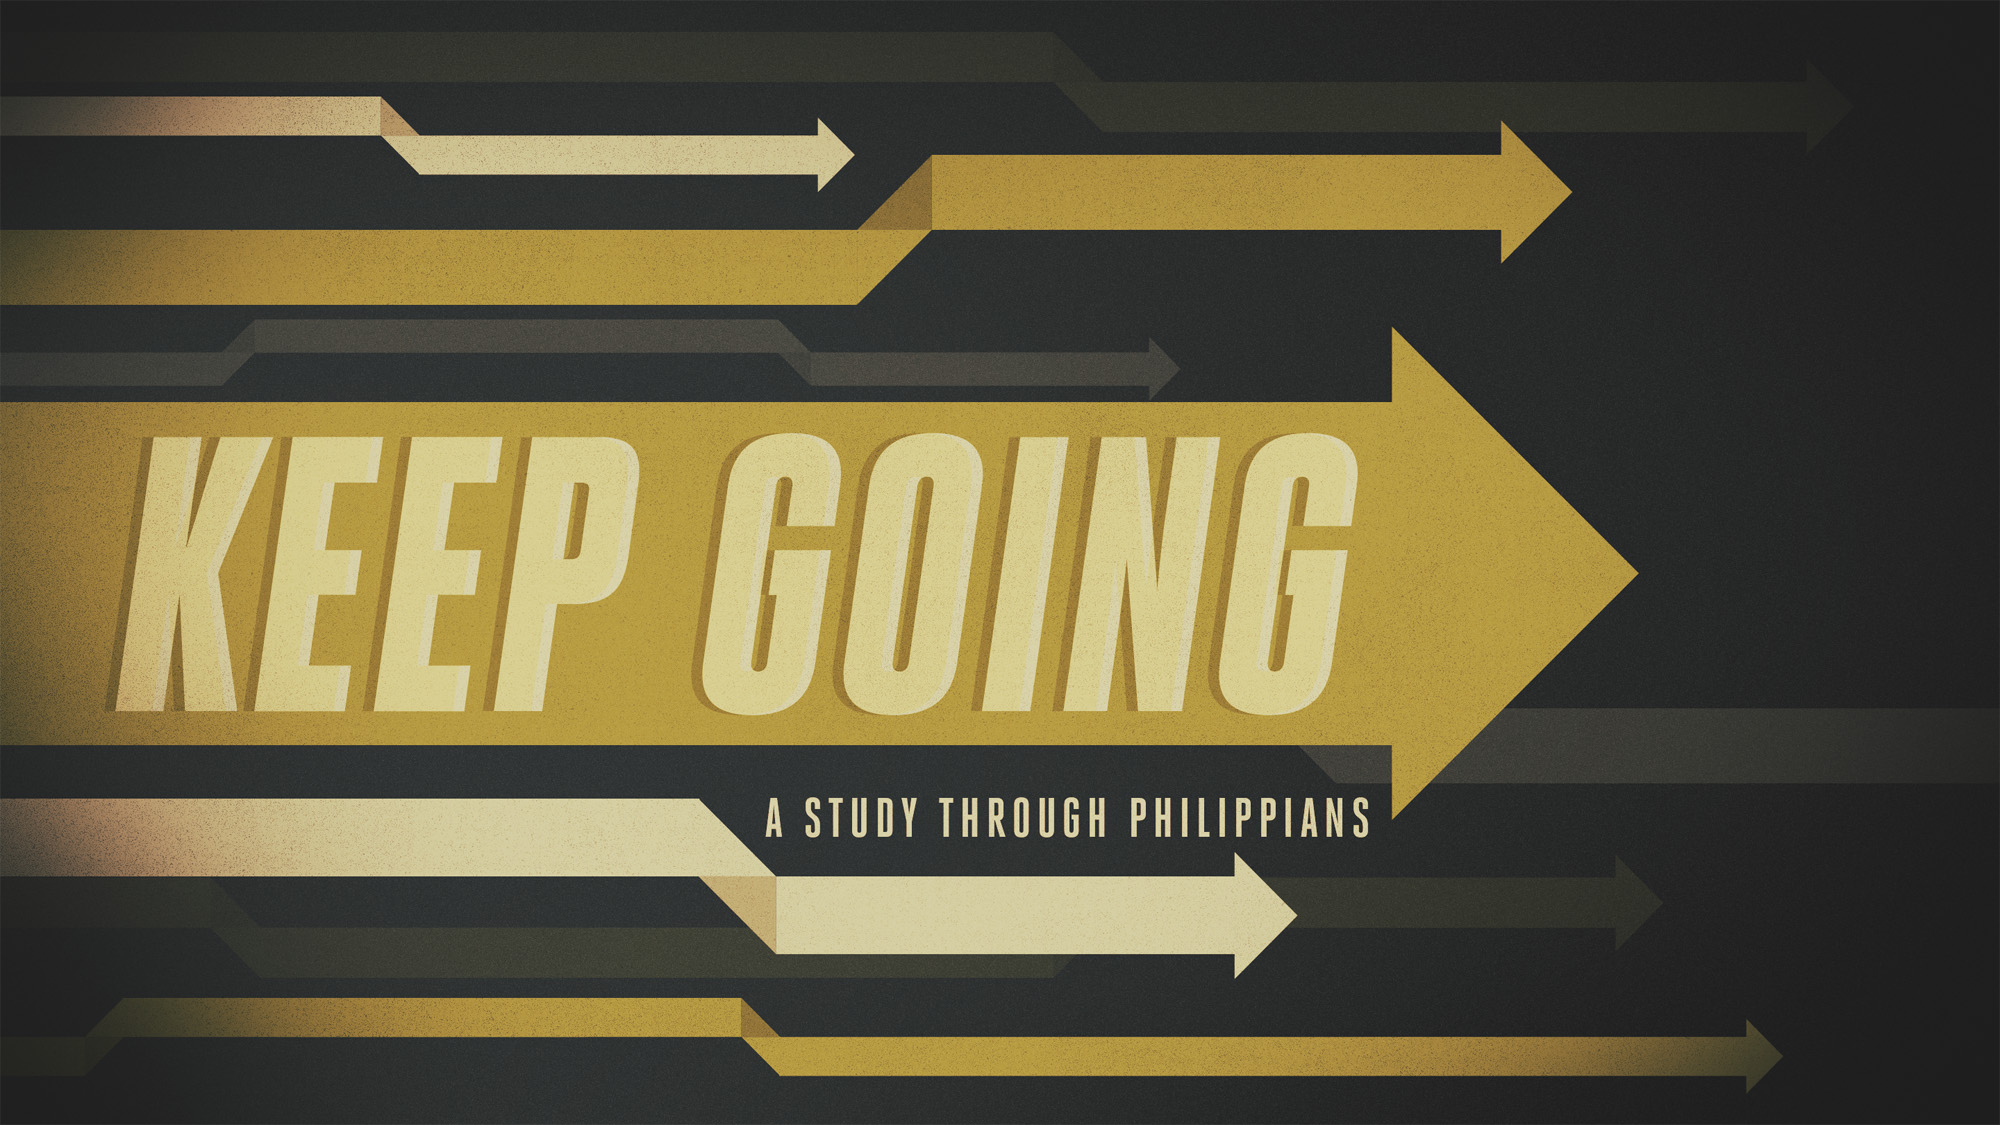 07-23-17 | Keep Going | The Joy of Giving | Mark Anderson